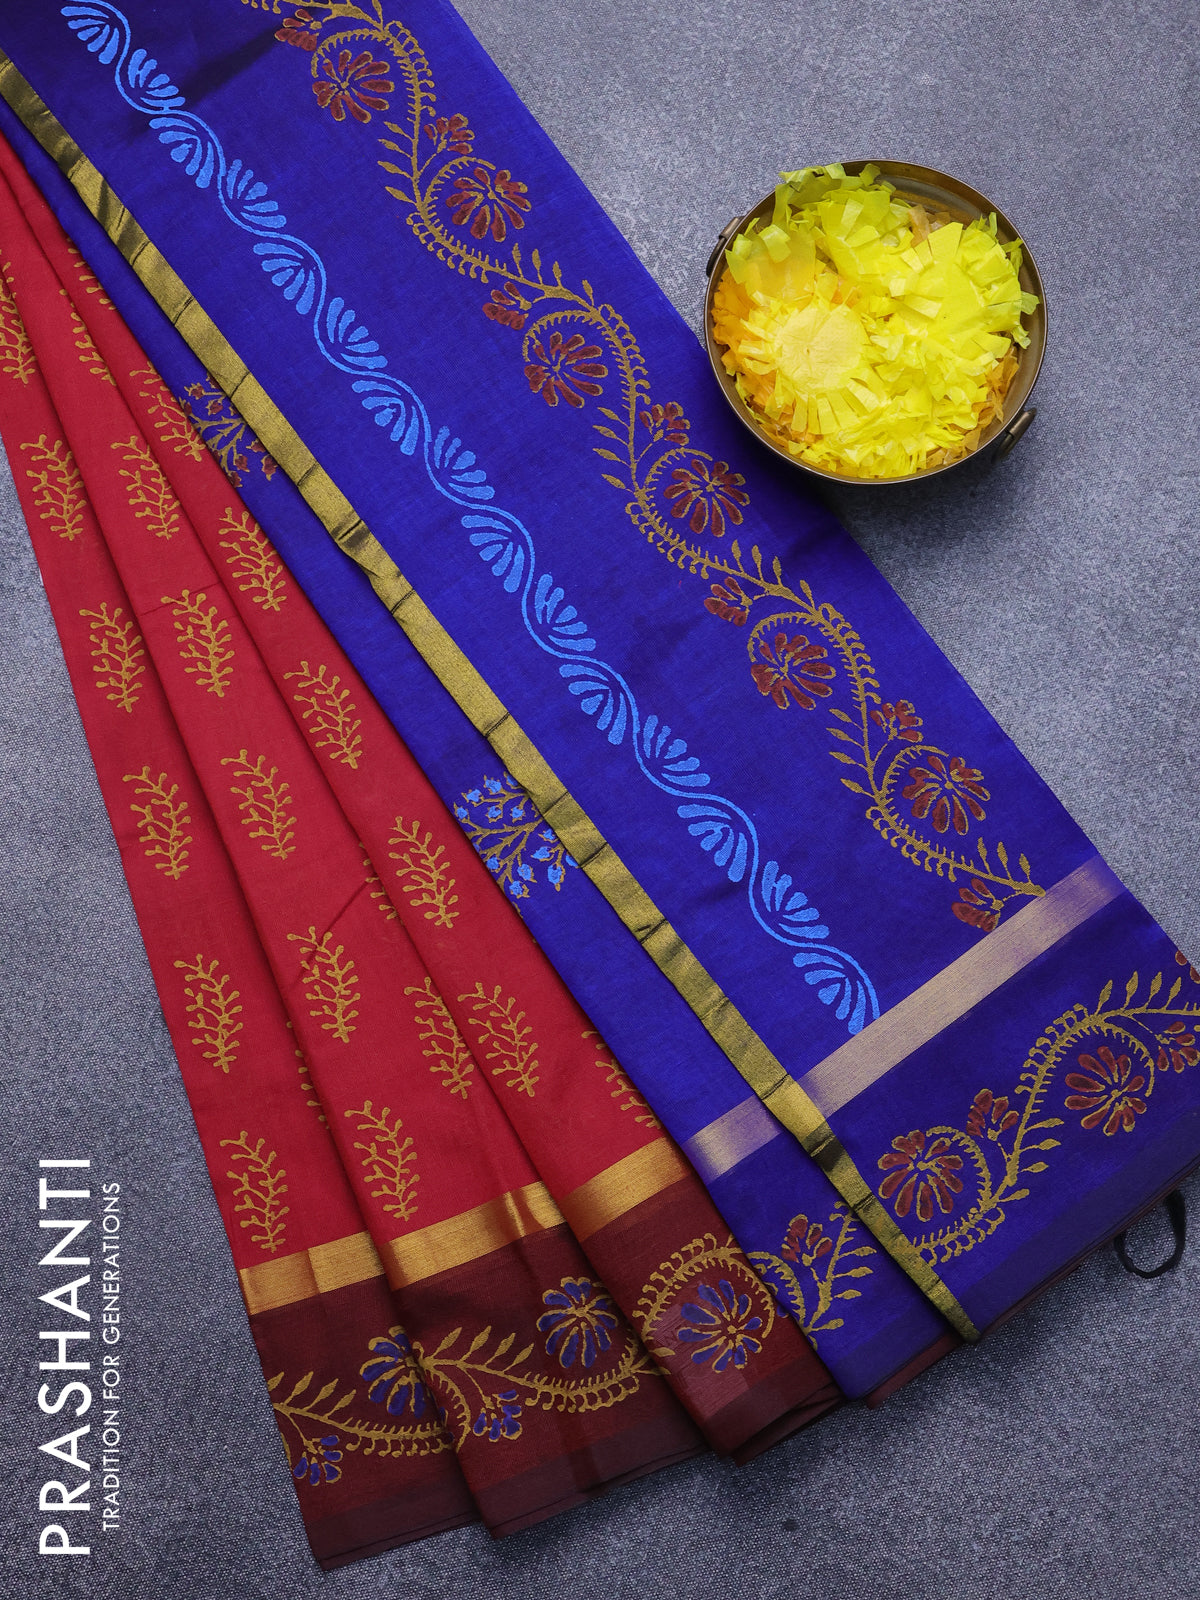 Silk cotton block printed saree red and maroon blue with allover butta prints and zari woven simple border